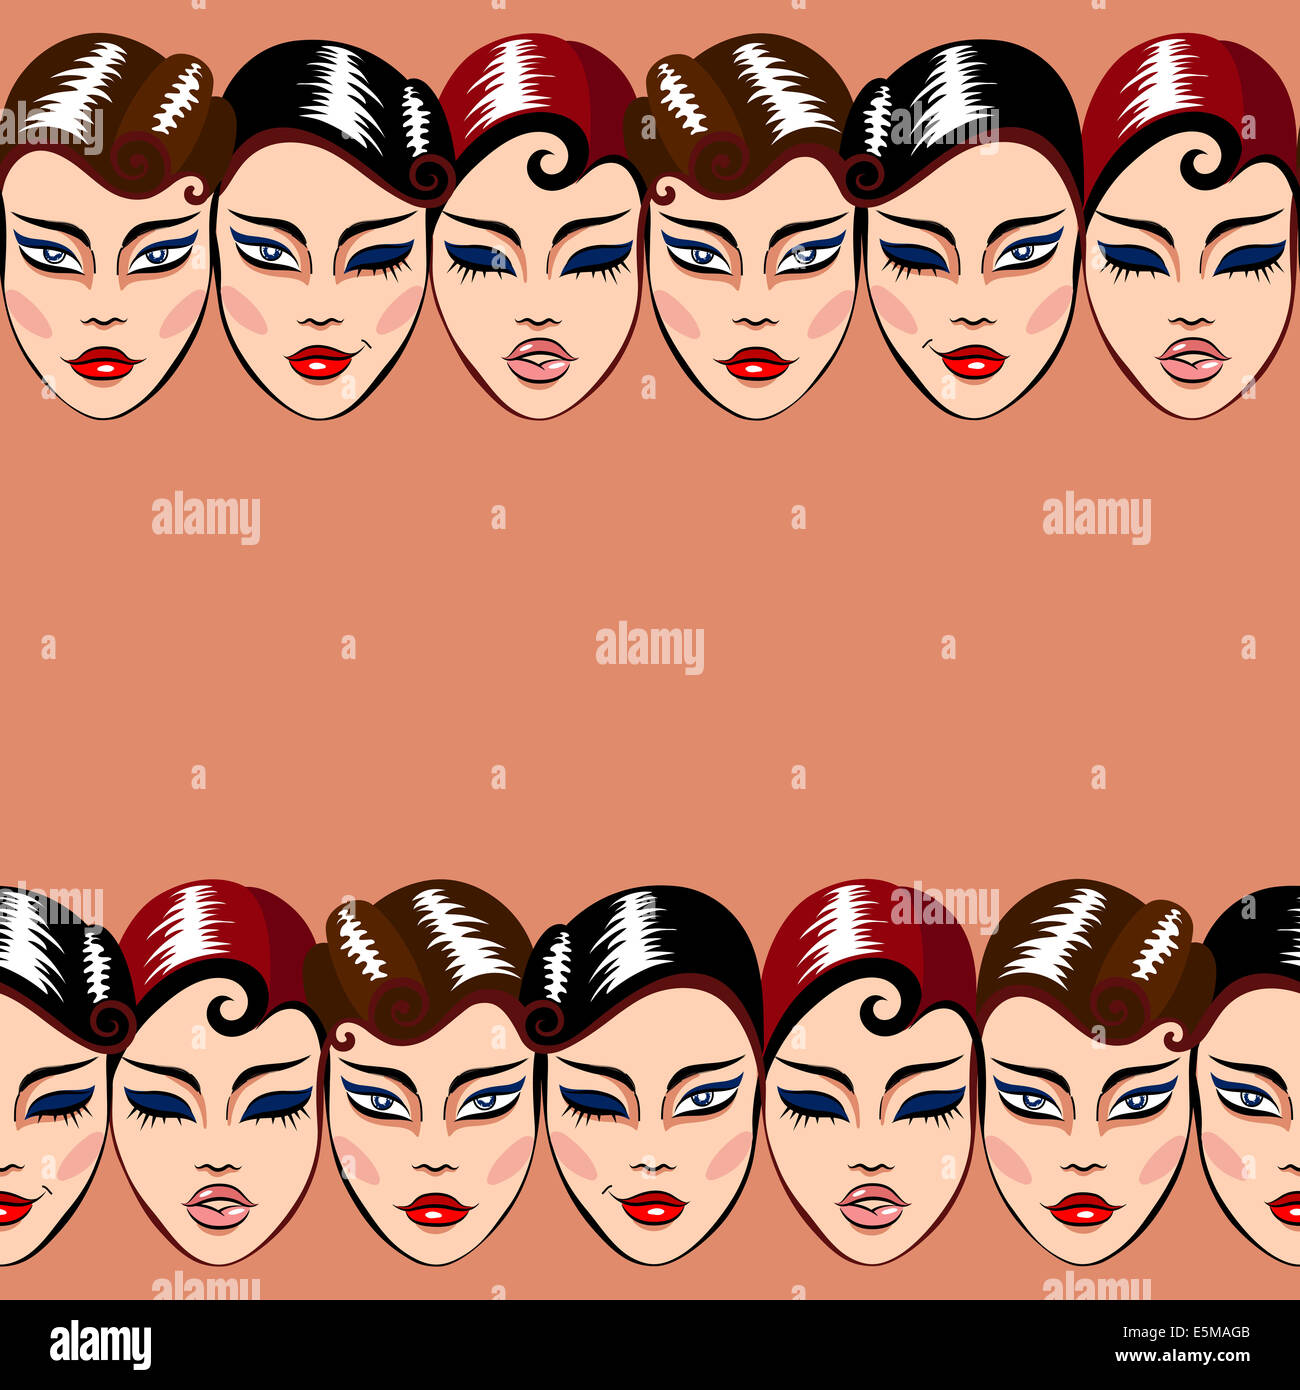 Seamless pattern with rows of woman faces Stock Photo